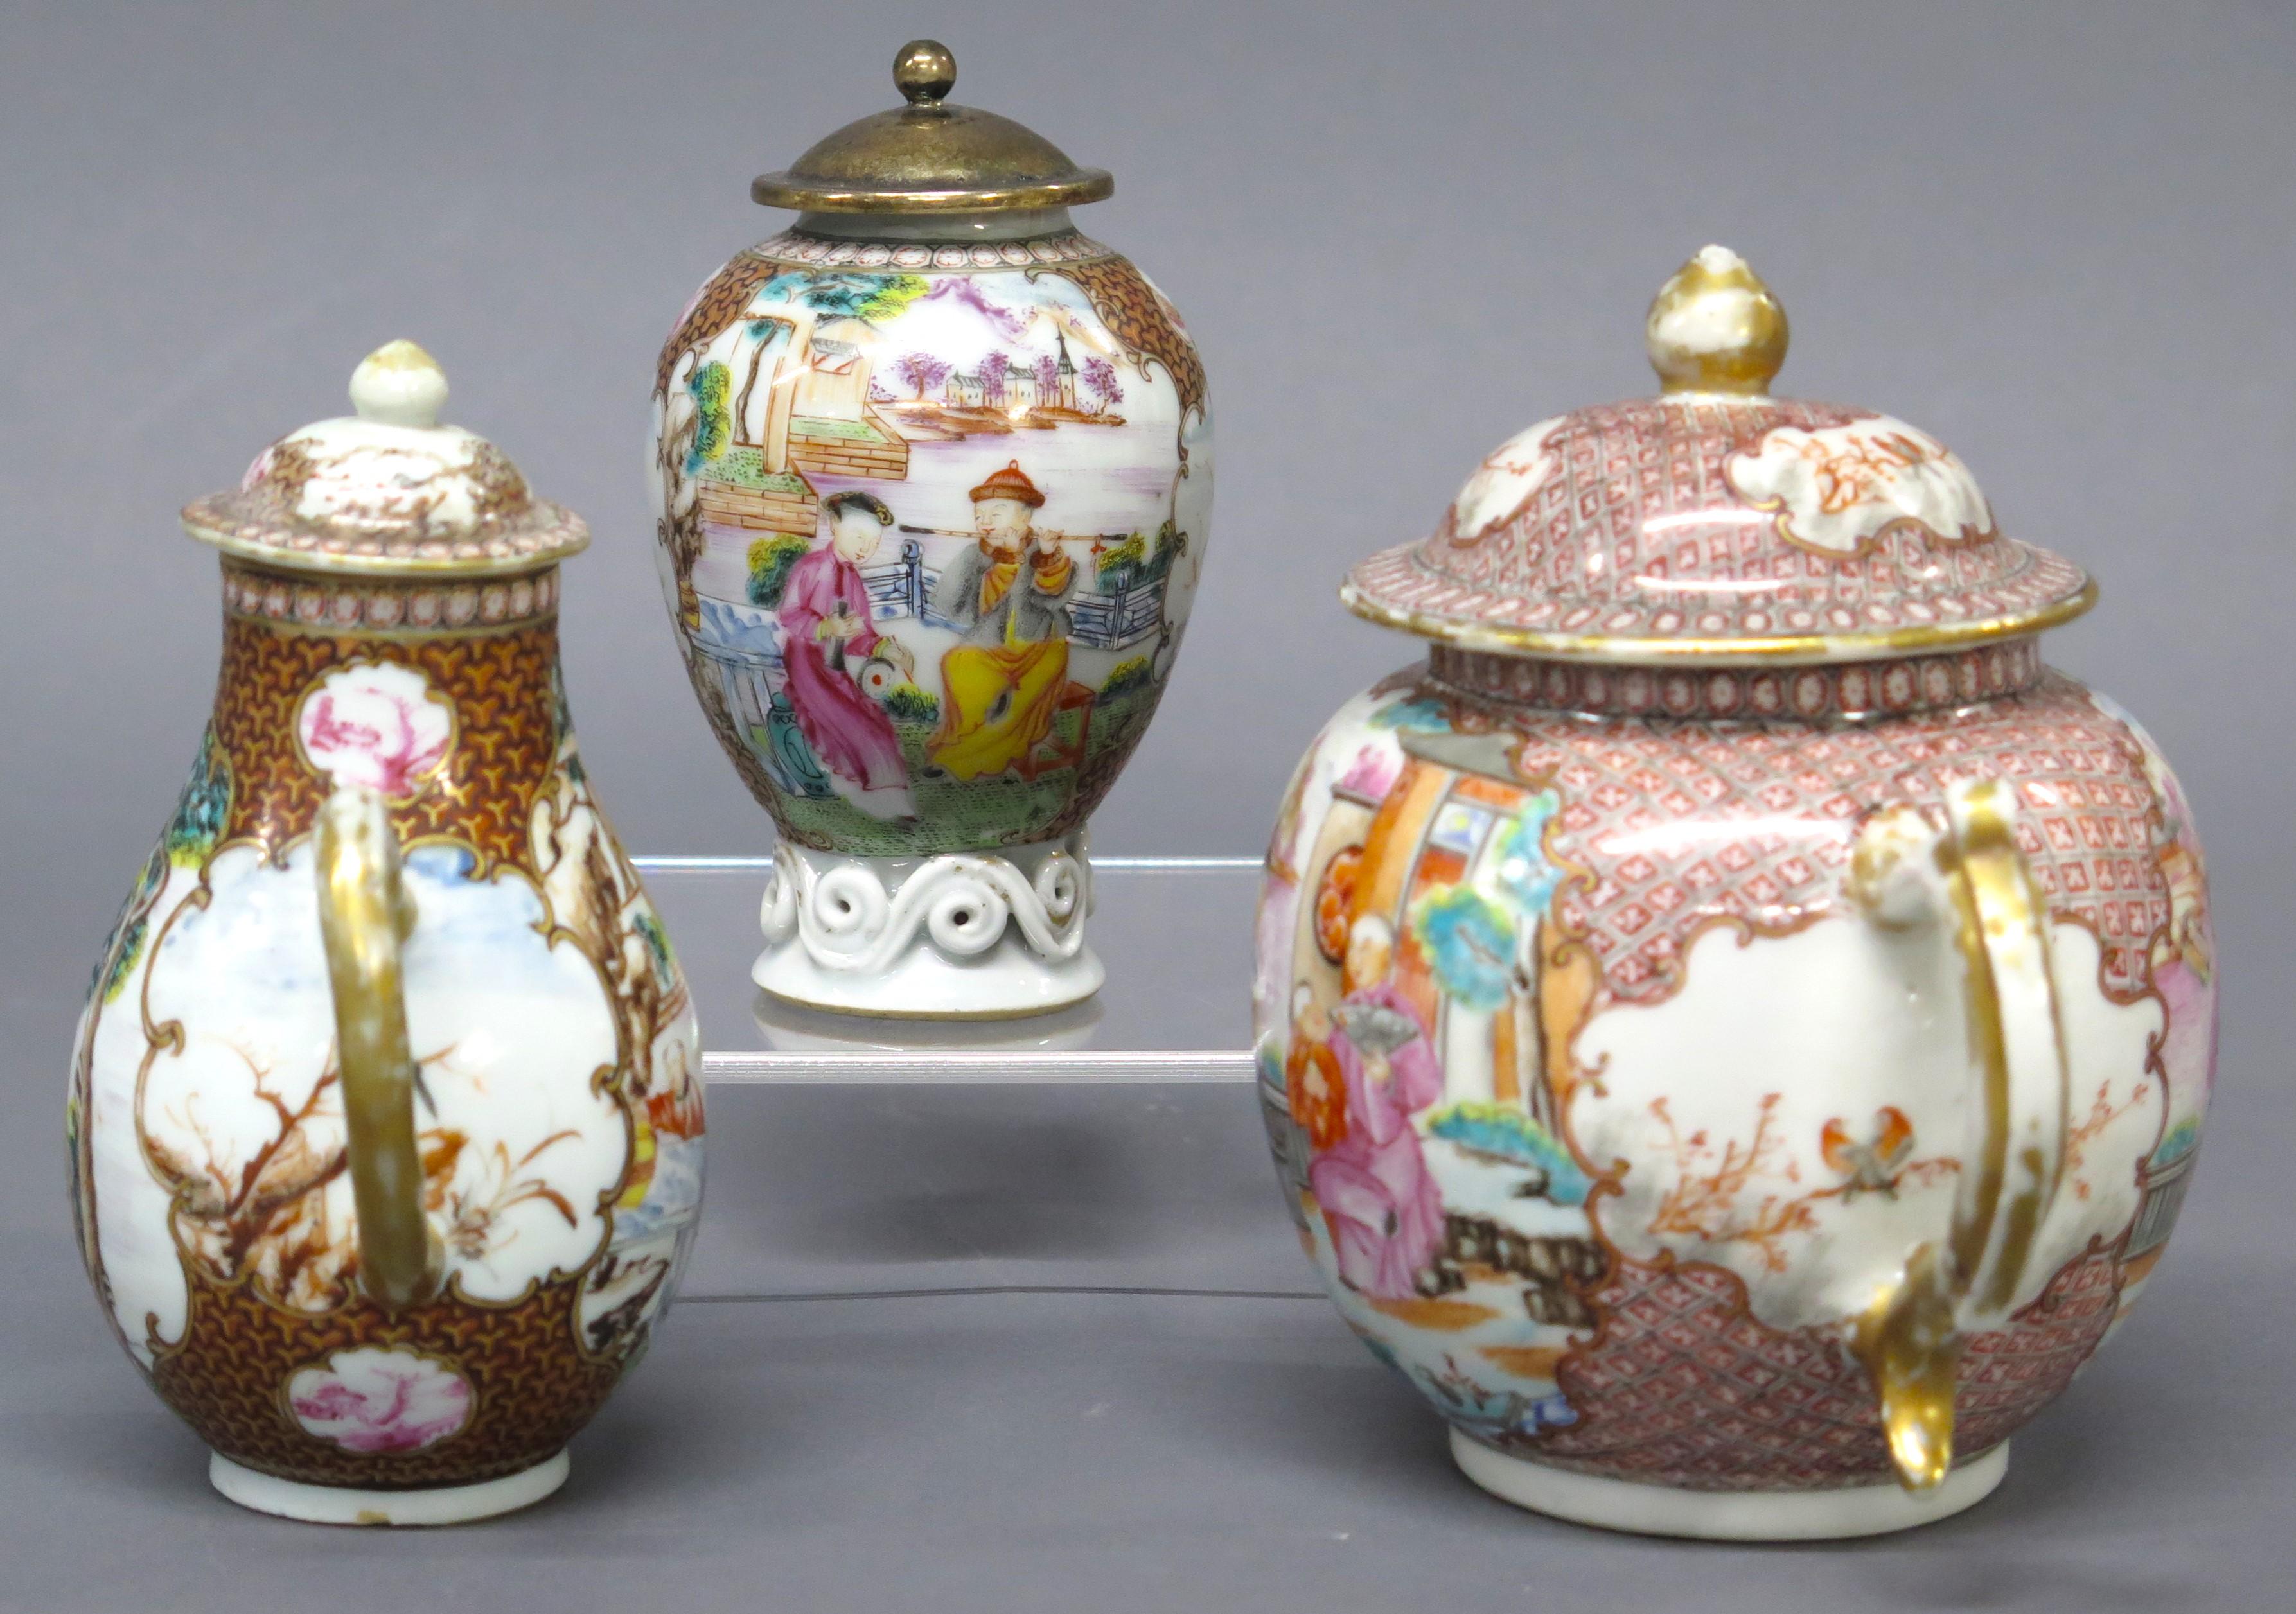 Chinese expChinese export tea set, Rockefeller pattern, covered tea pot, lidded creamer and lidded sugar urn, purchased at Sotherby's auction by previous owner.  China. 18th Century.

                                 ( sterling silver lid on the